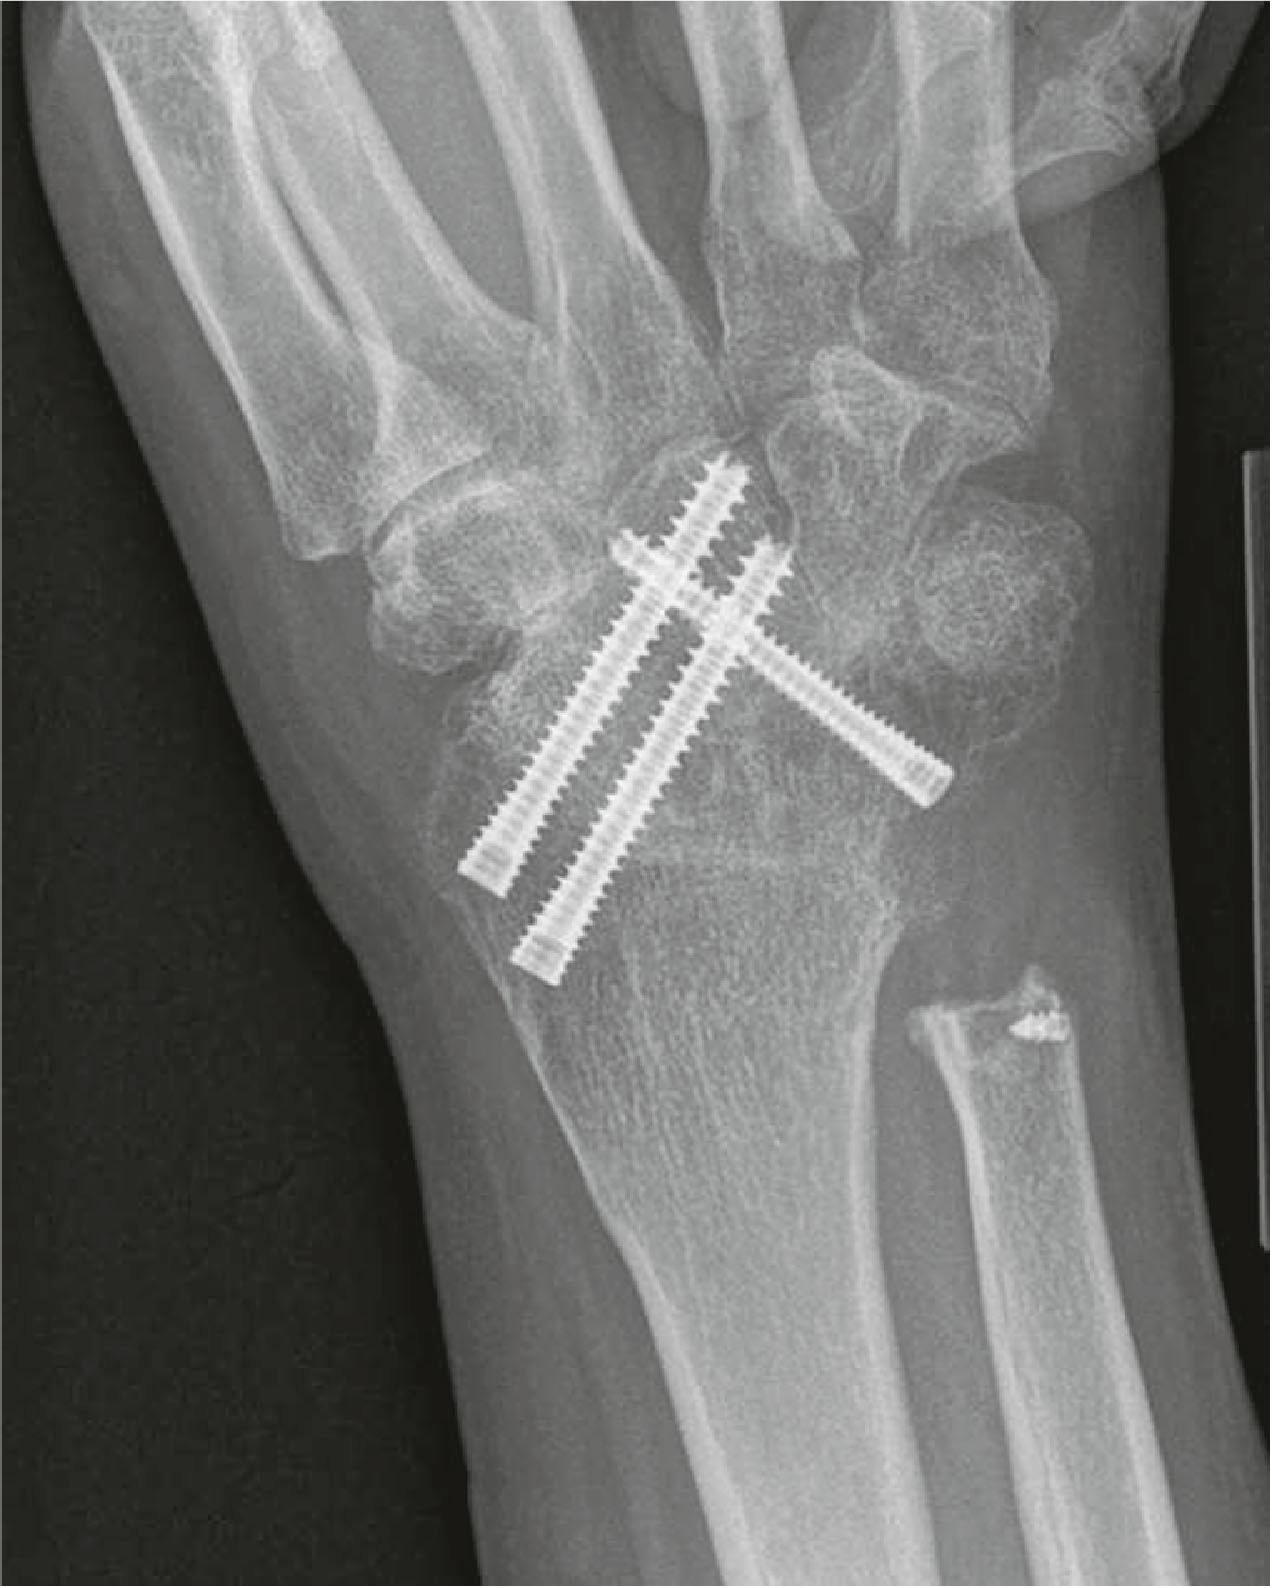 Figure 19.36, Wrist arthrodesis with headless compression screws in a patient with good bone quality.